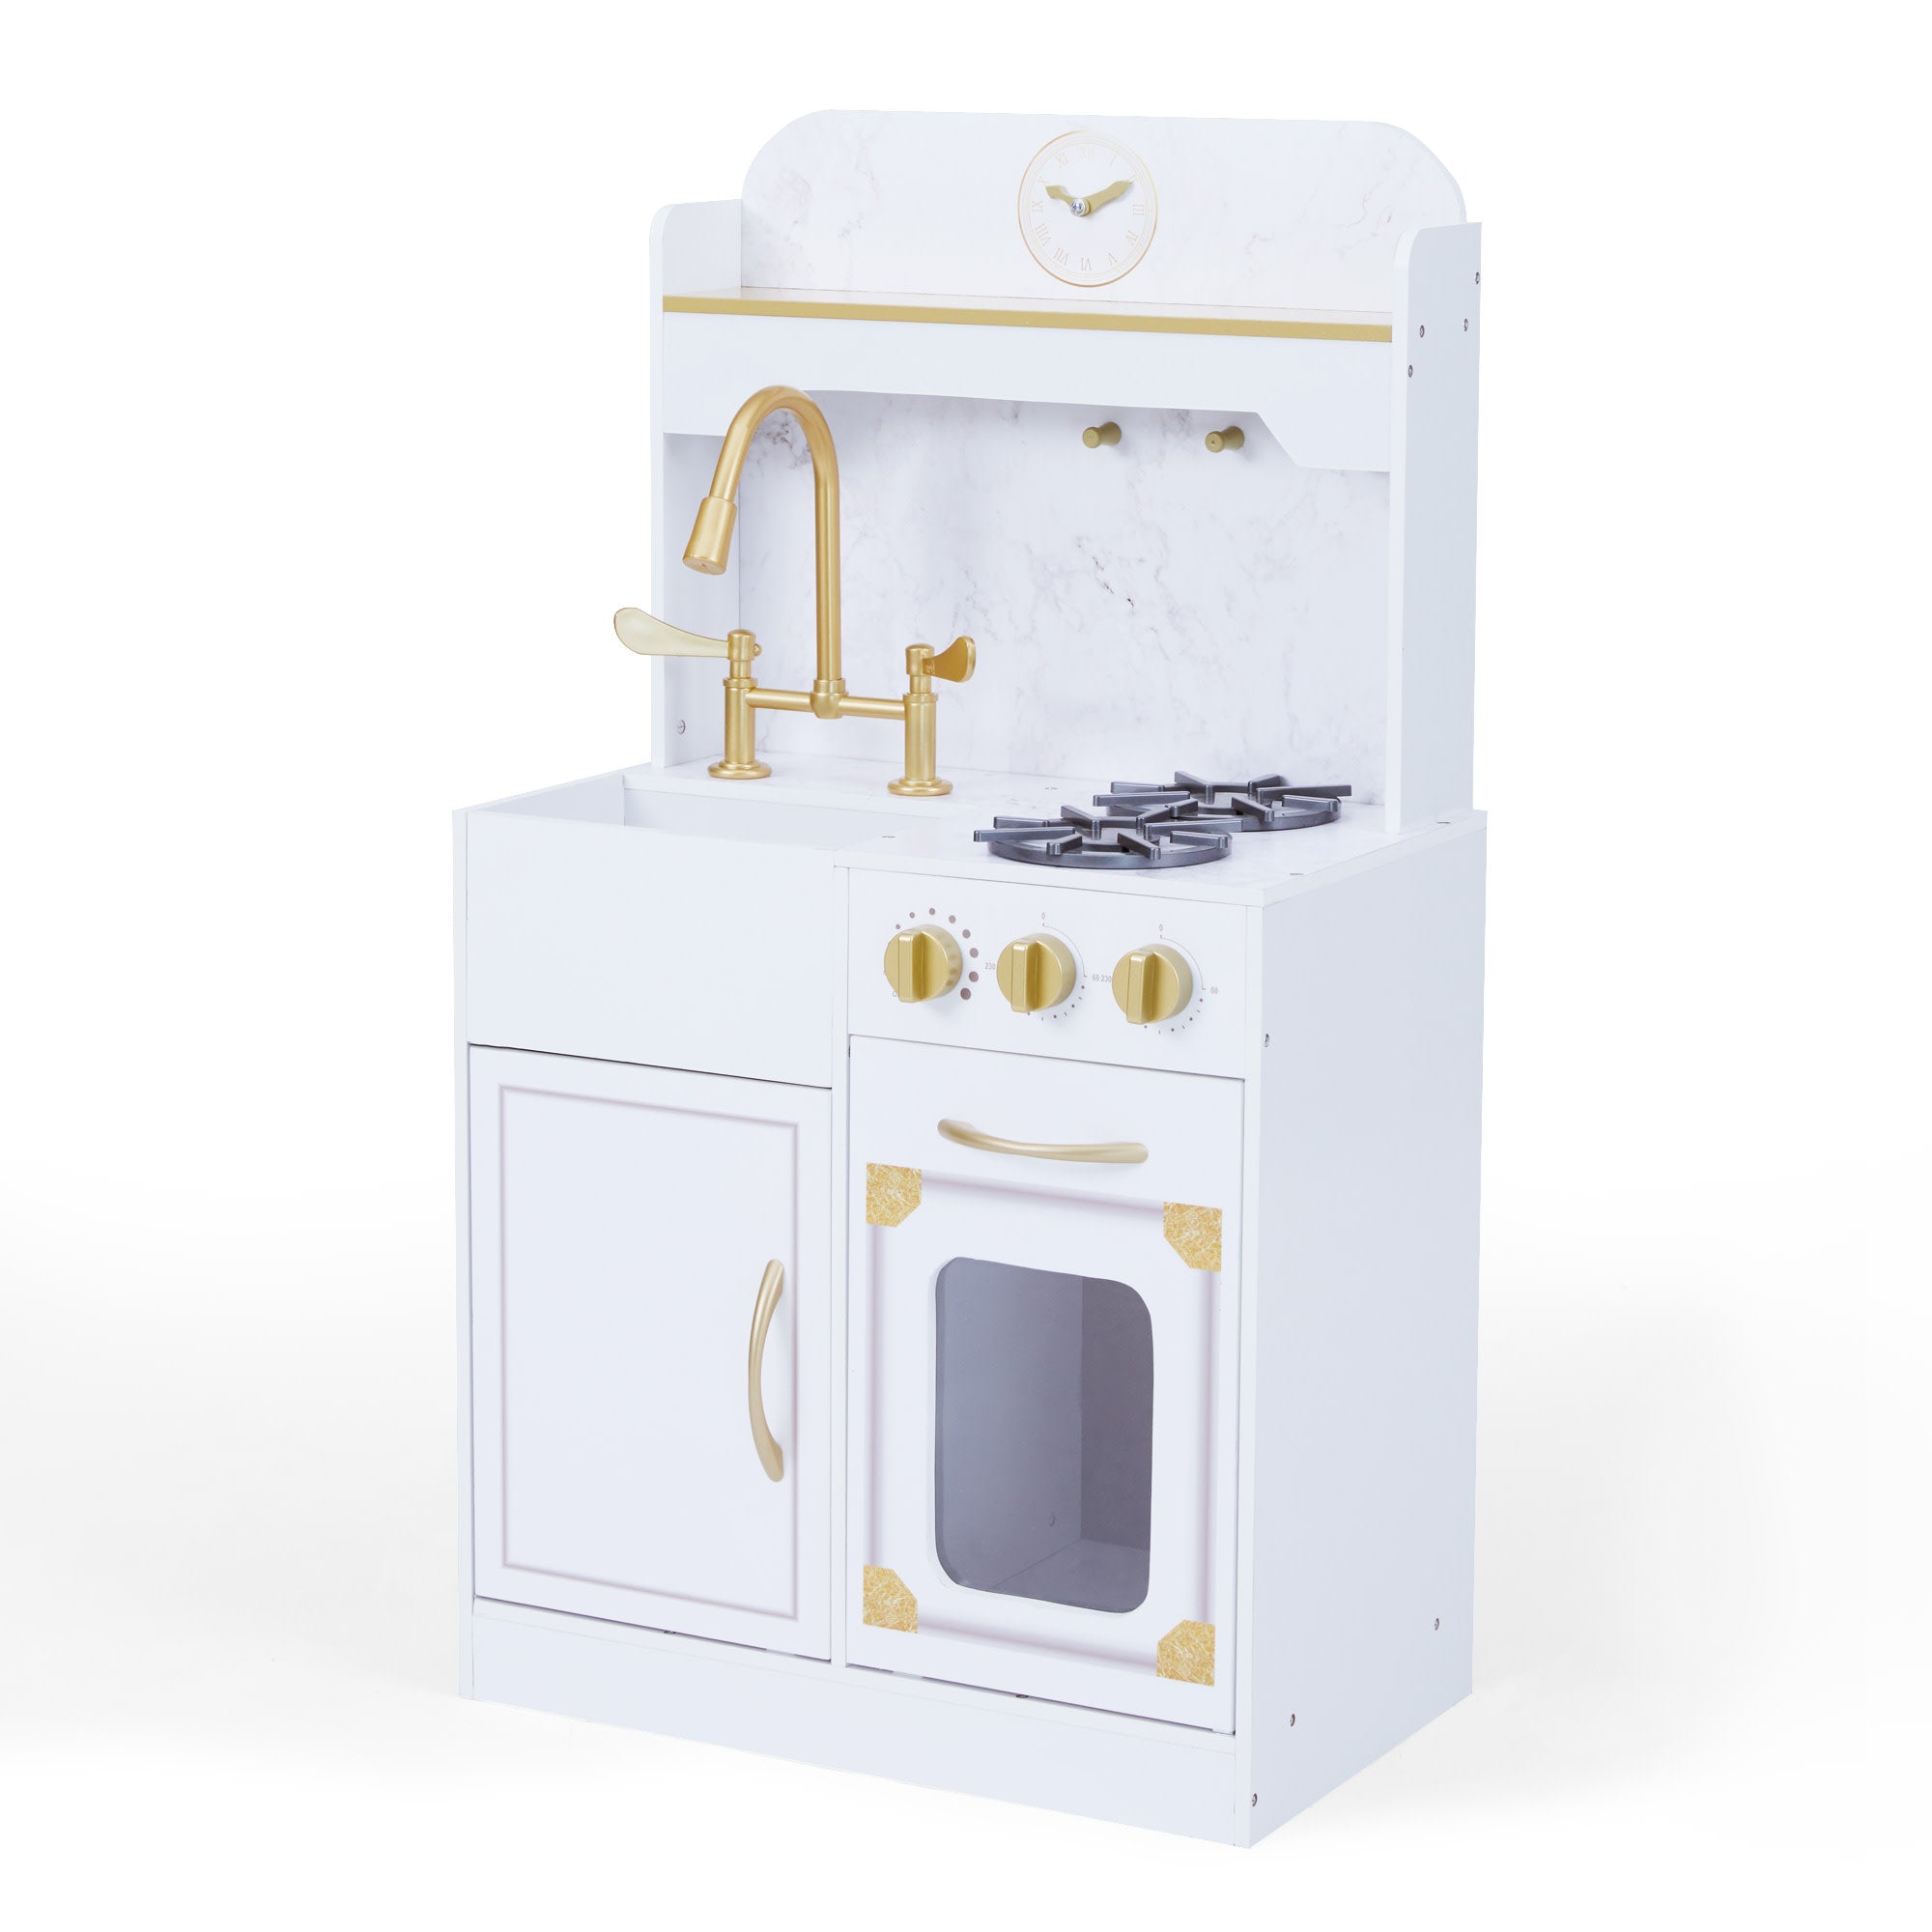 Teamson Kids Petite Versailles Classic Play Kitchen with Accessories, White